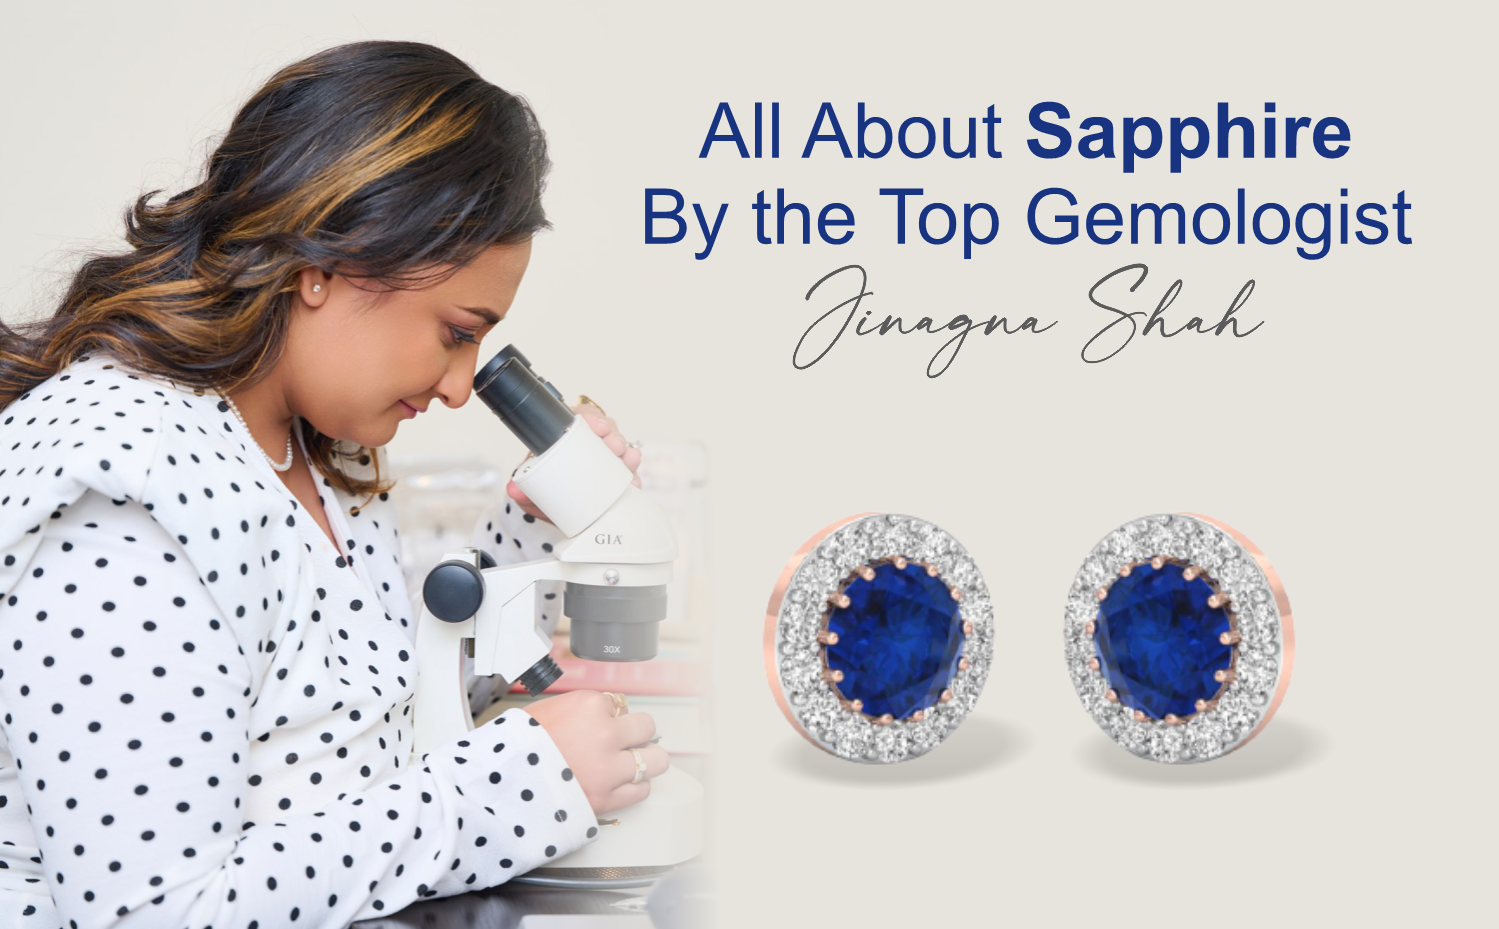 All About Sapphire By the Top Gemologist - Jinagna Shah